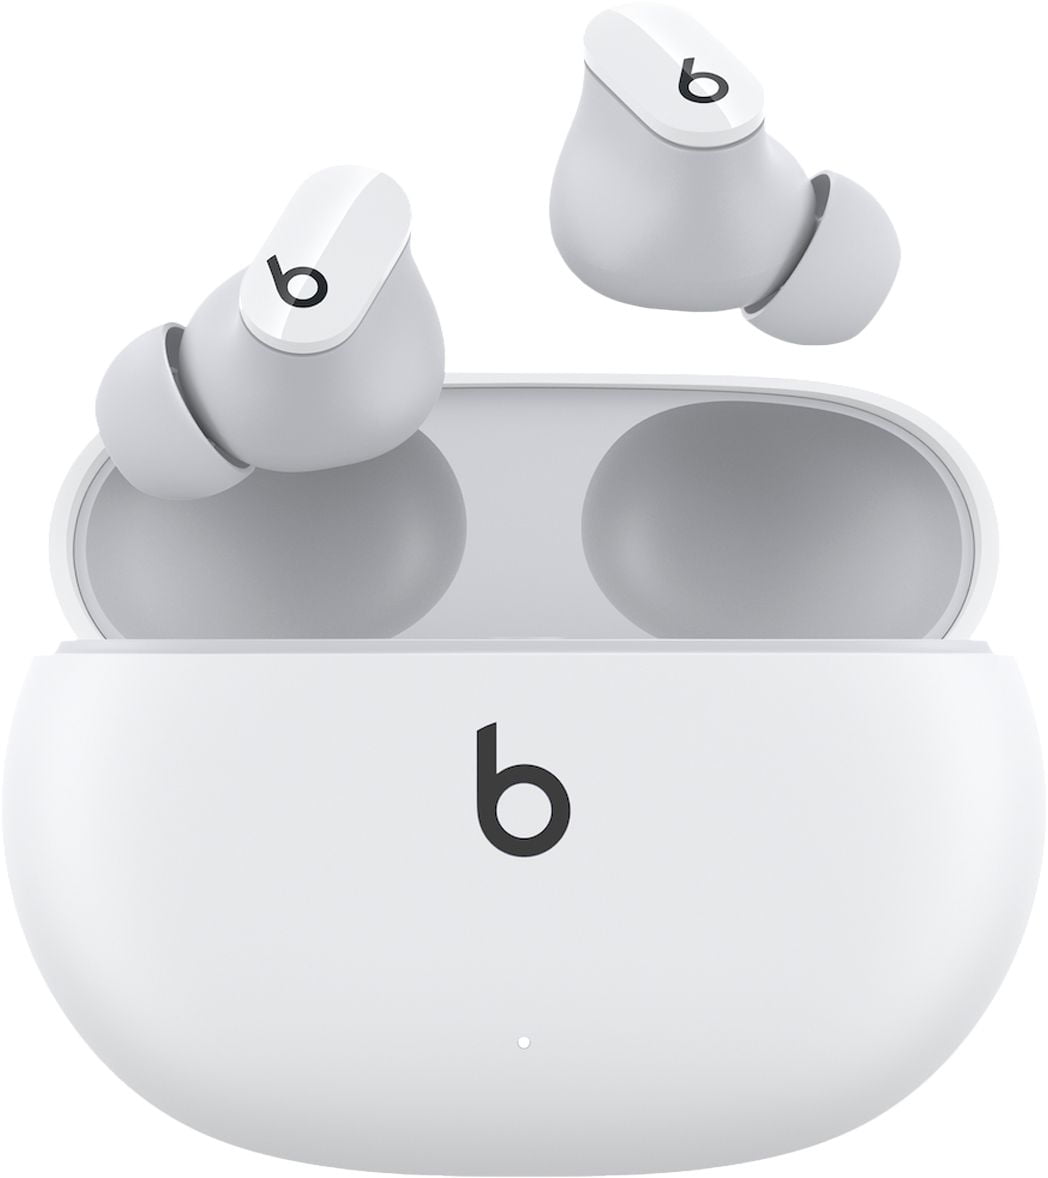 Precipice tryk udvikling af Restored Beats by Dr. Dre Studio Buds White Totally Wireless Noise  Cancelling In Ear Headphones MJ4Y3LL/A (Refurbished) - Walmart.com